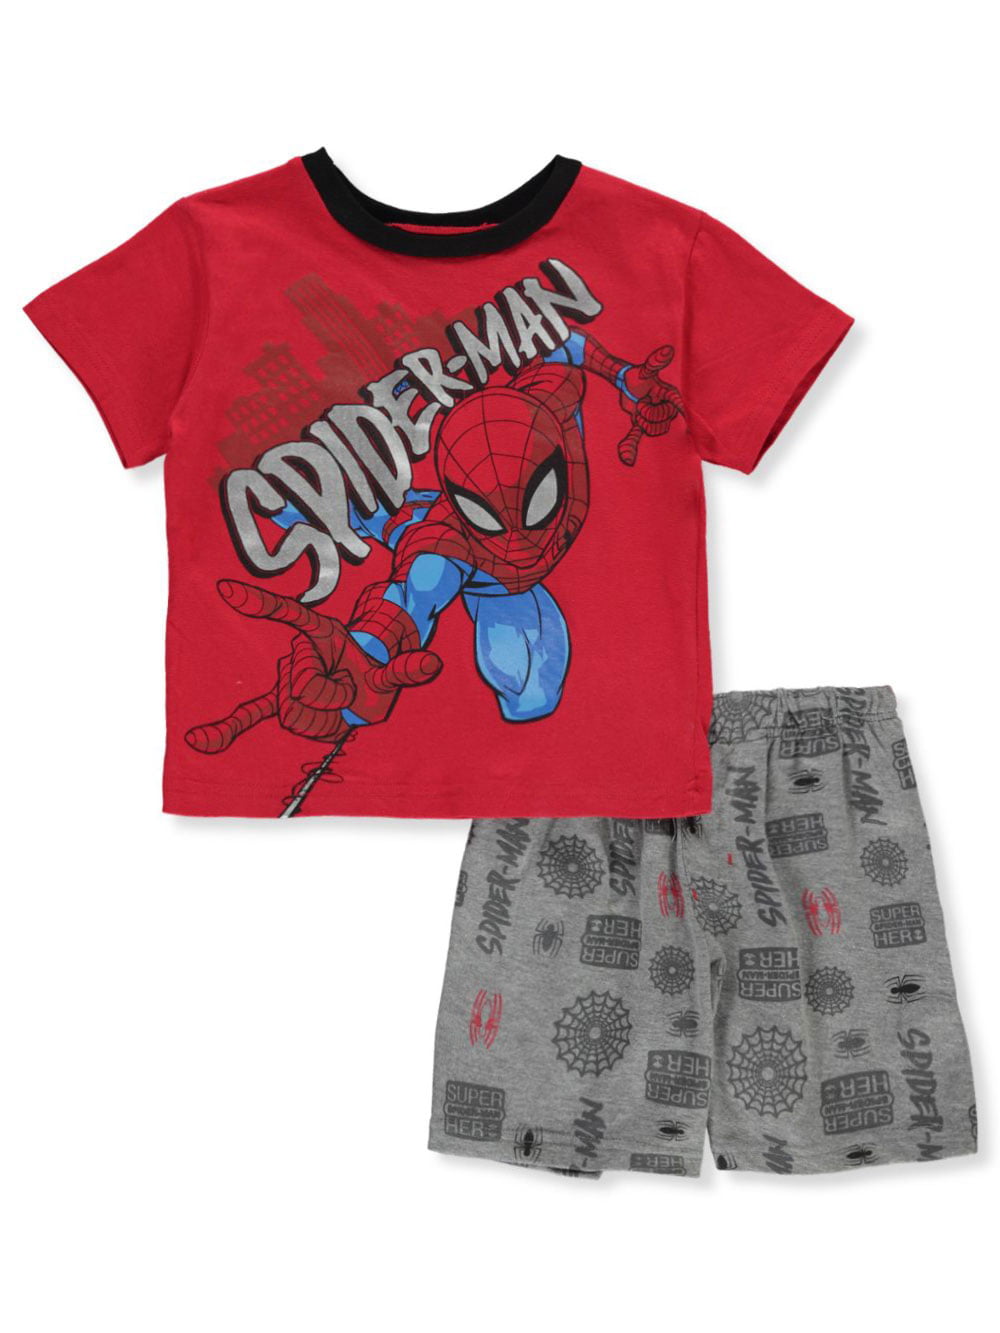 Spiderman Marvel Little Boys Set  2 Pc /T-shirt & Short/ Red and Gray/ 4-7/NEW